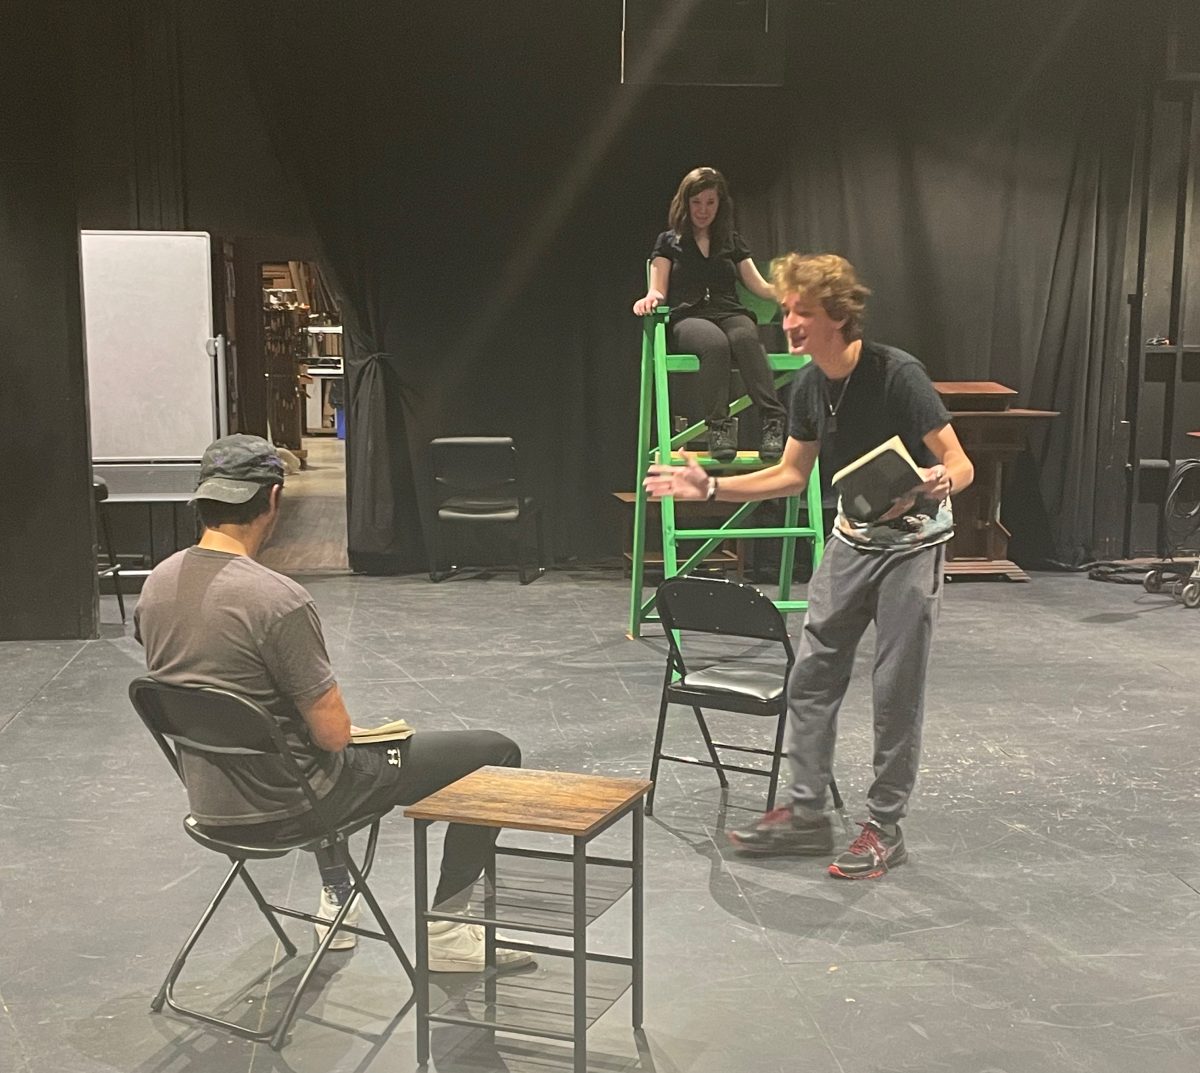 A photo from rehearsals. From left to right: Isaac Gibbs 23 as Bill, Paige Hemmer 25 as The Referee, and Cian Colgan 26 as Frank.